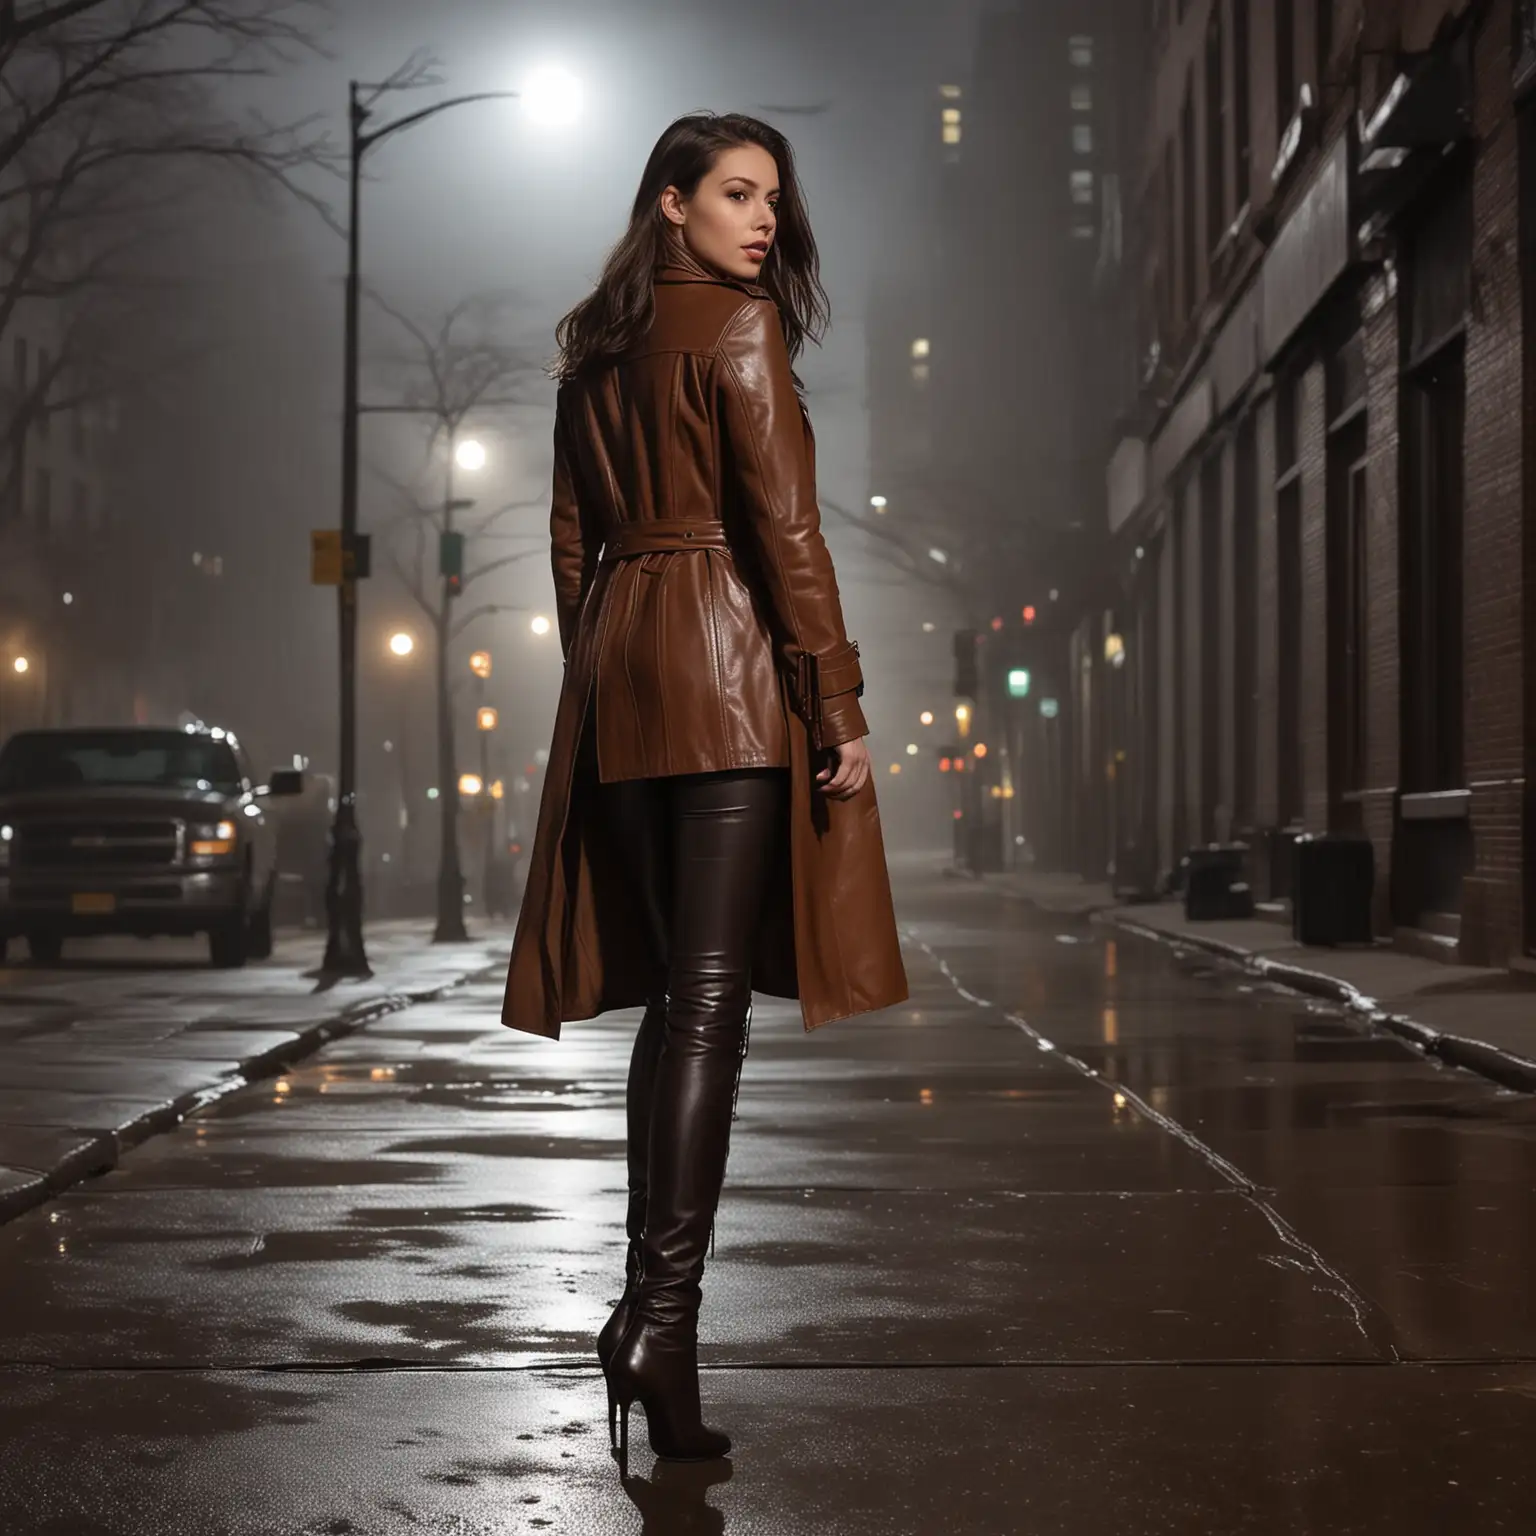 Solitary Night Stroll Brunette Woman in Leather Coat Moonlit New York City